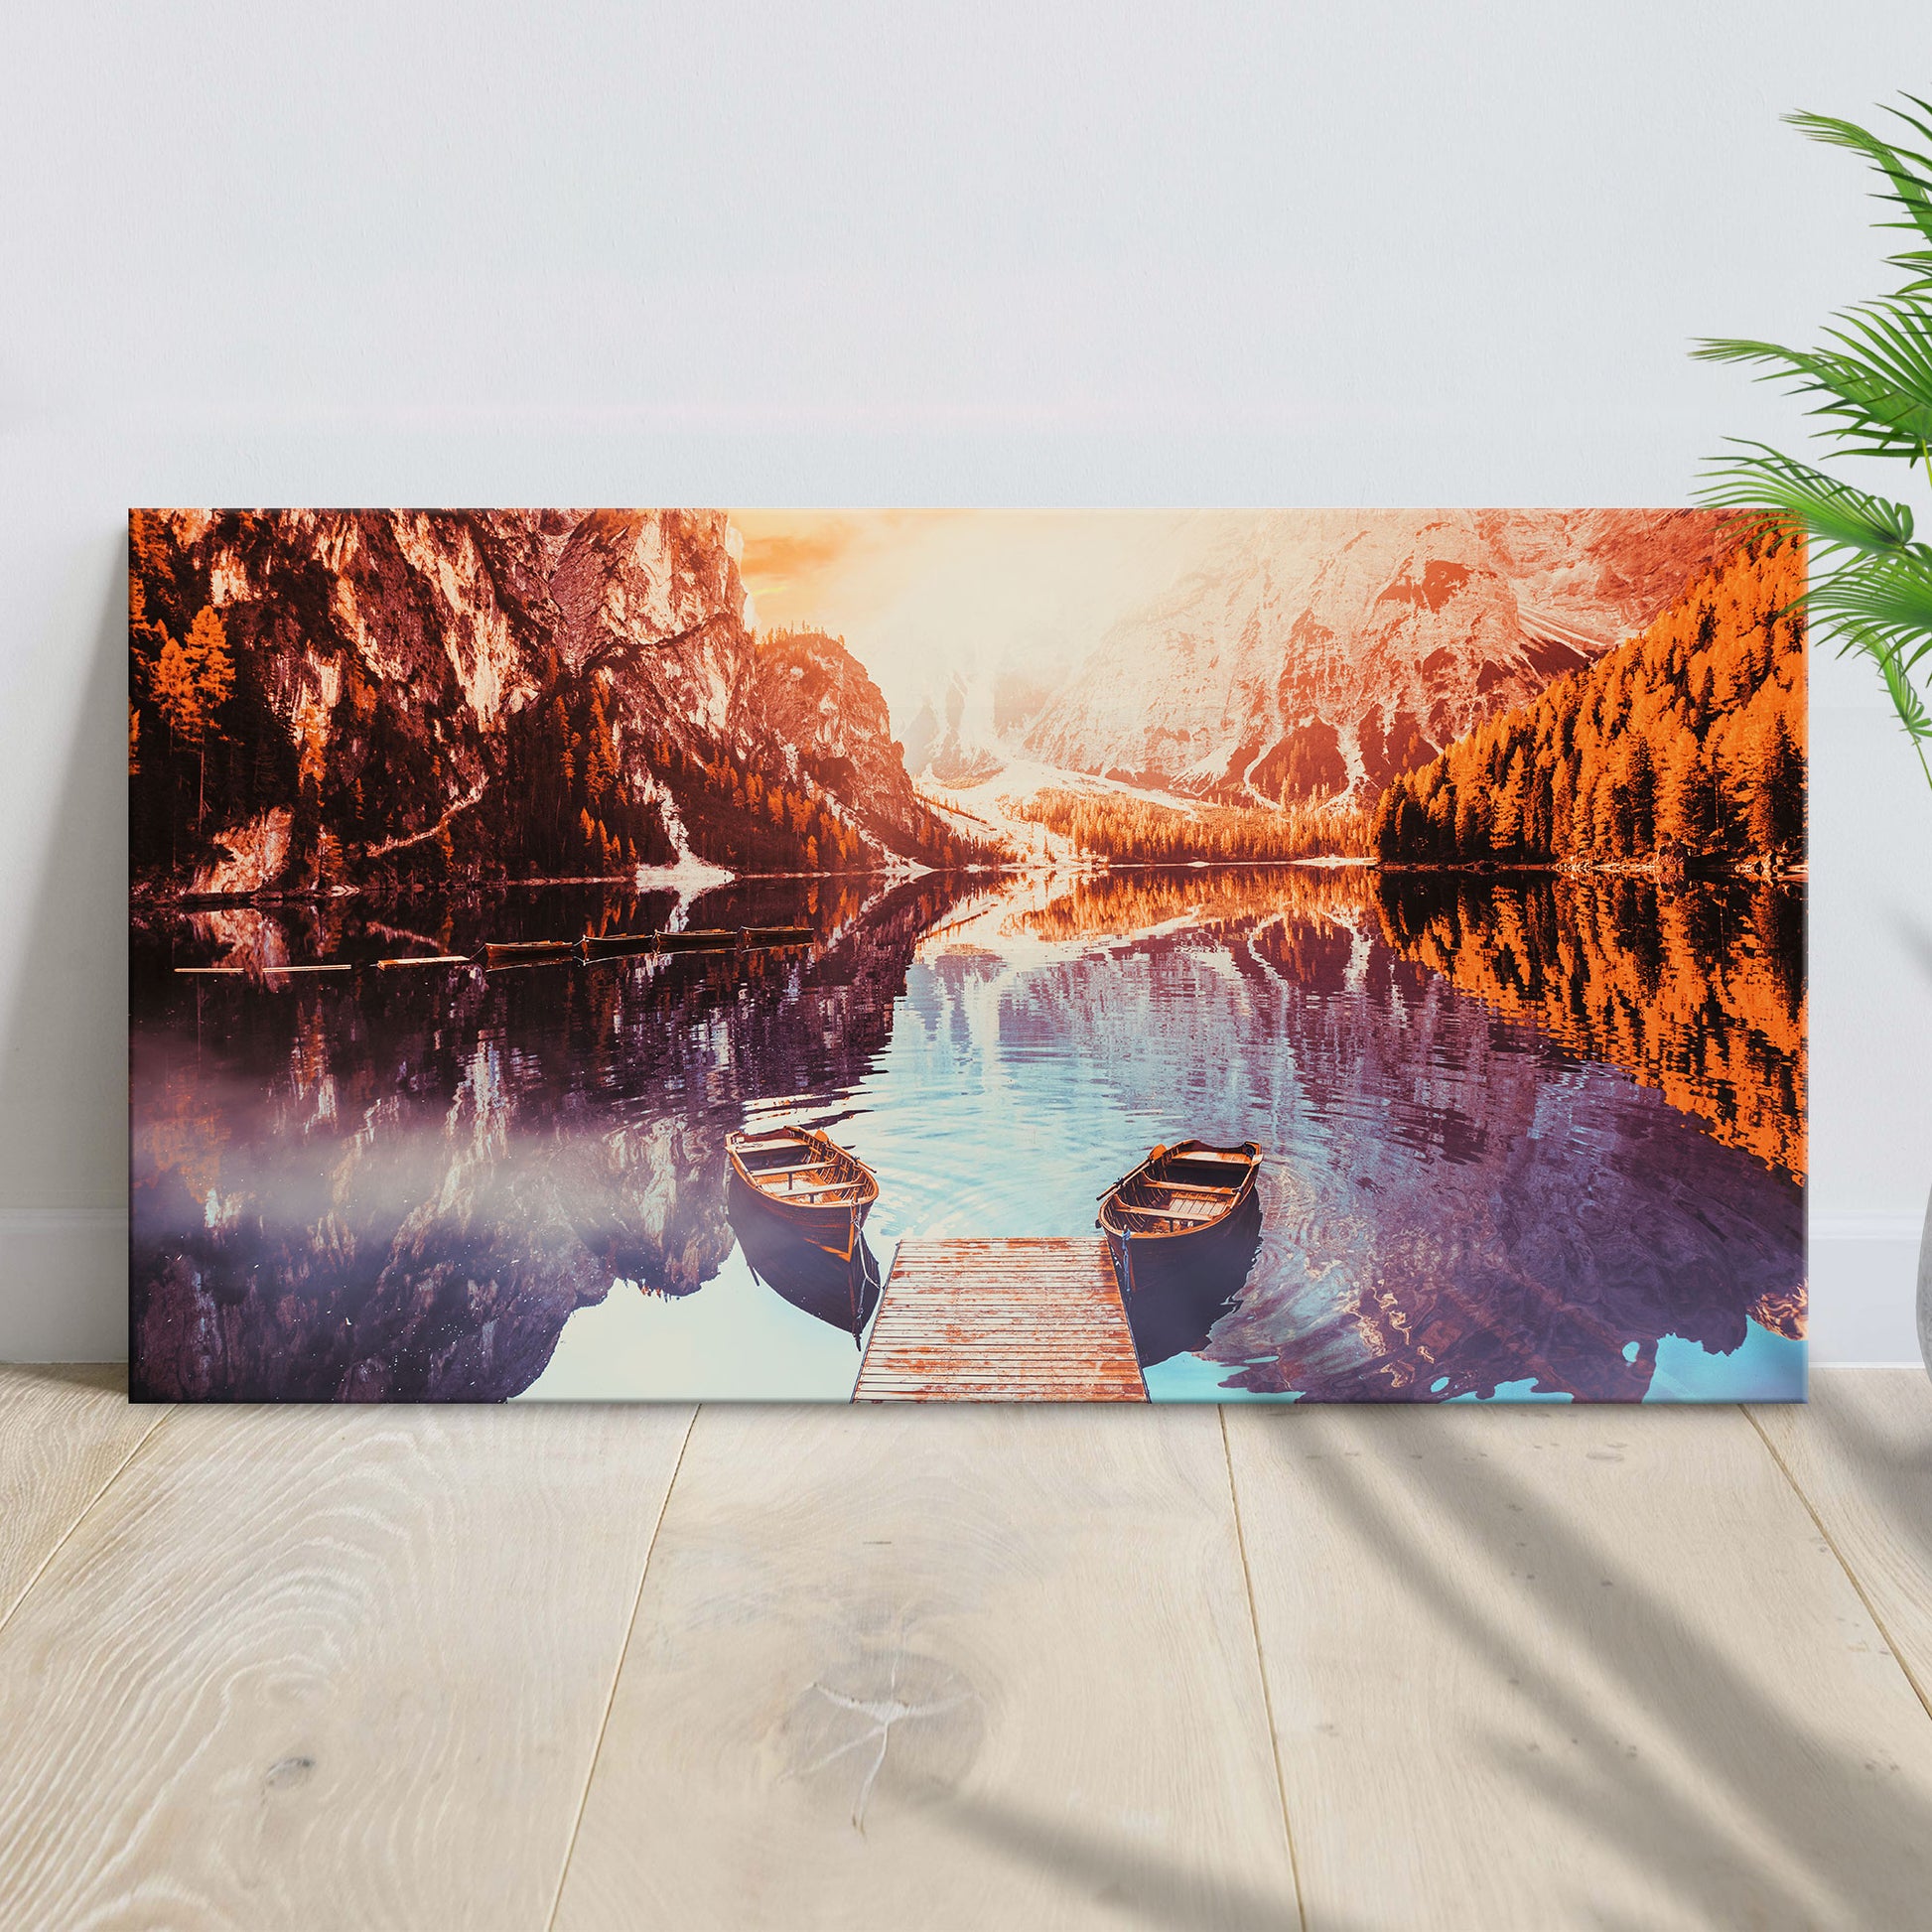 Sunset Reflection By The Lake Canvas Wall Art - Image by Tailored Canvases